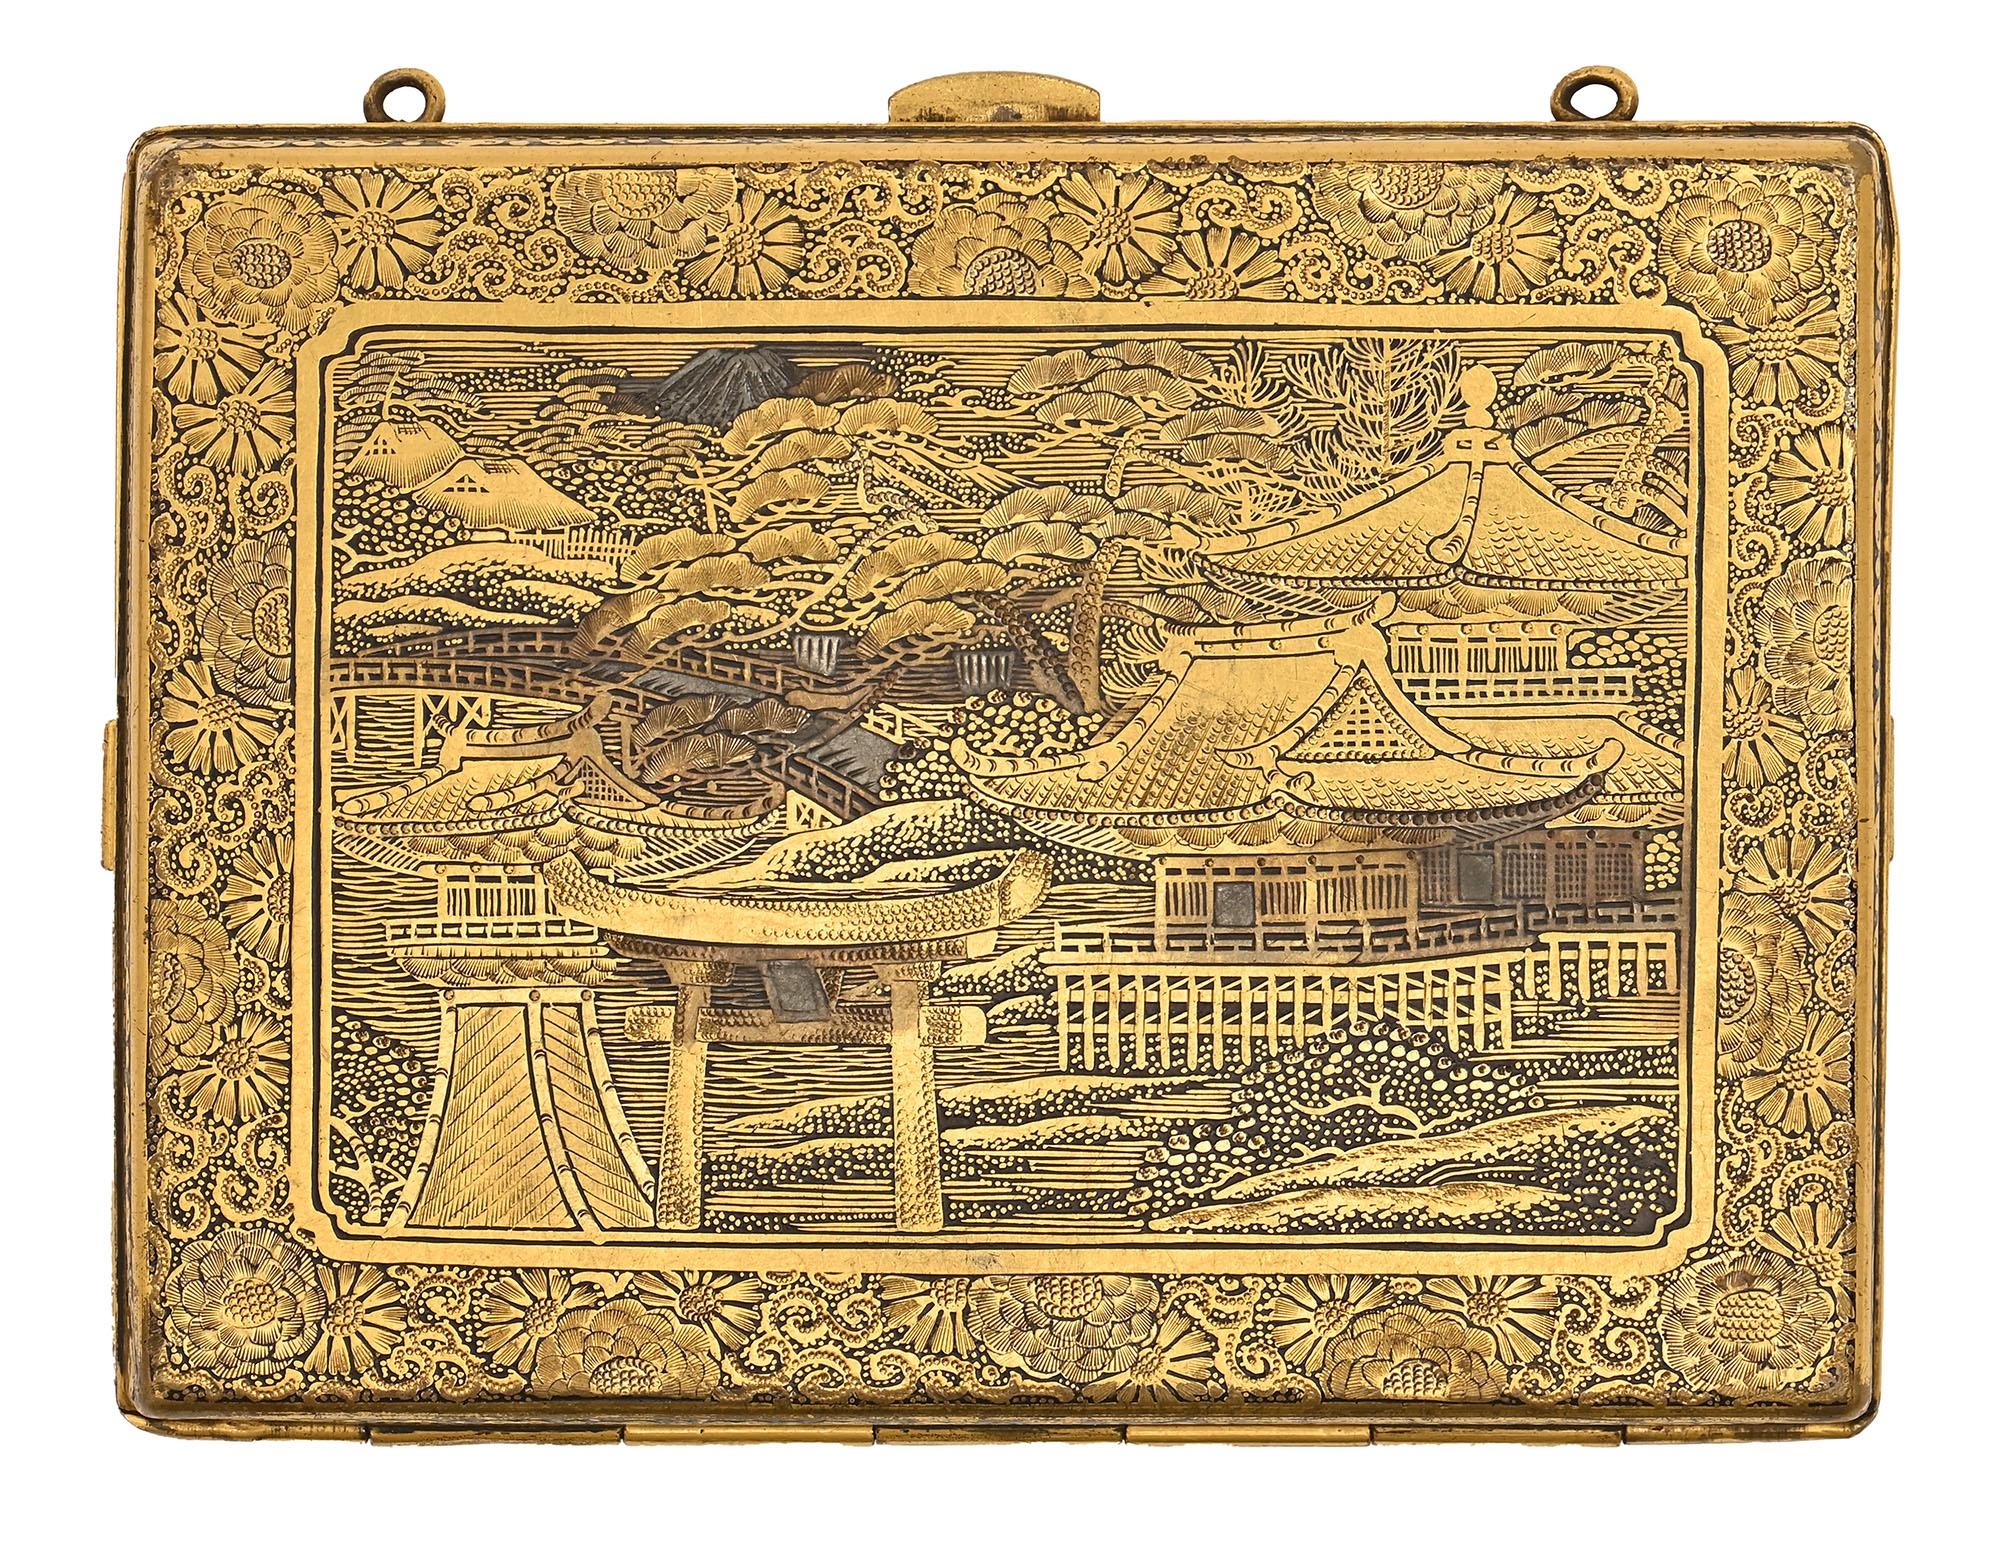 A Japanese inlaid metal compact, Kyoto,  Taisho or early Showa period, decorated in gold and